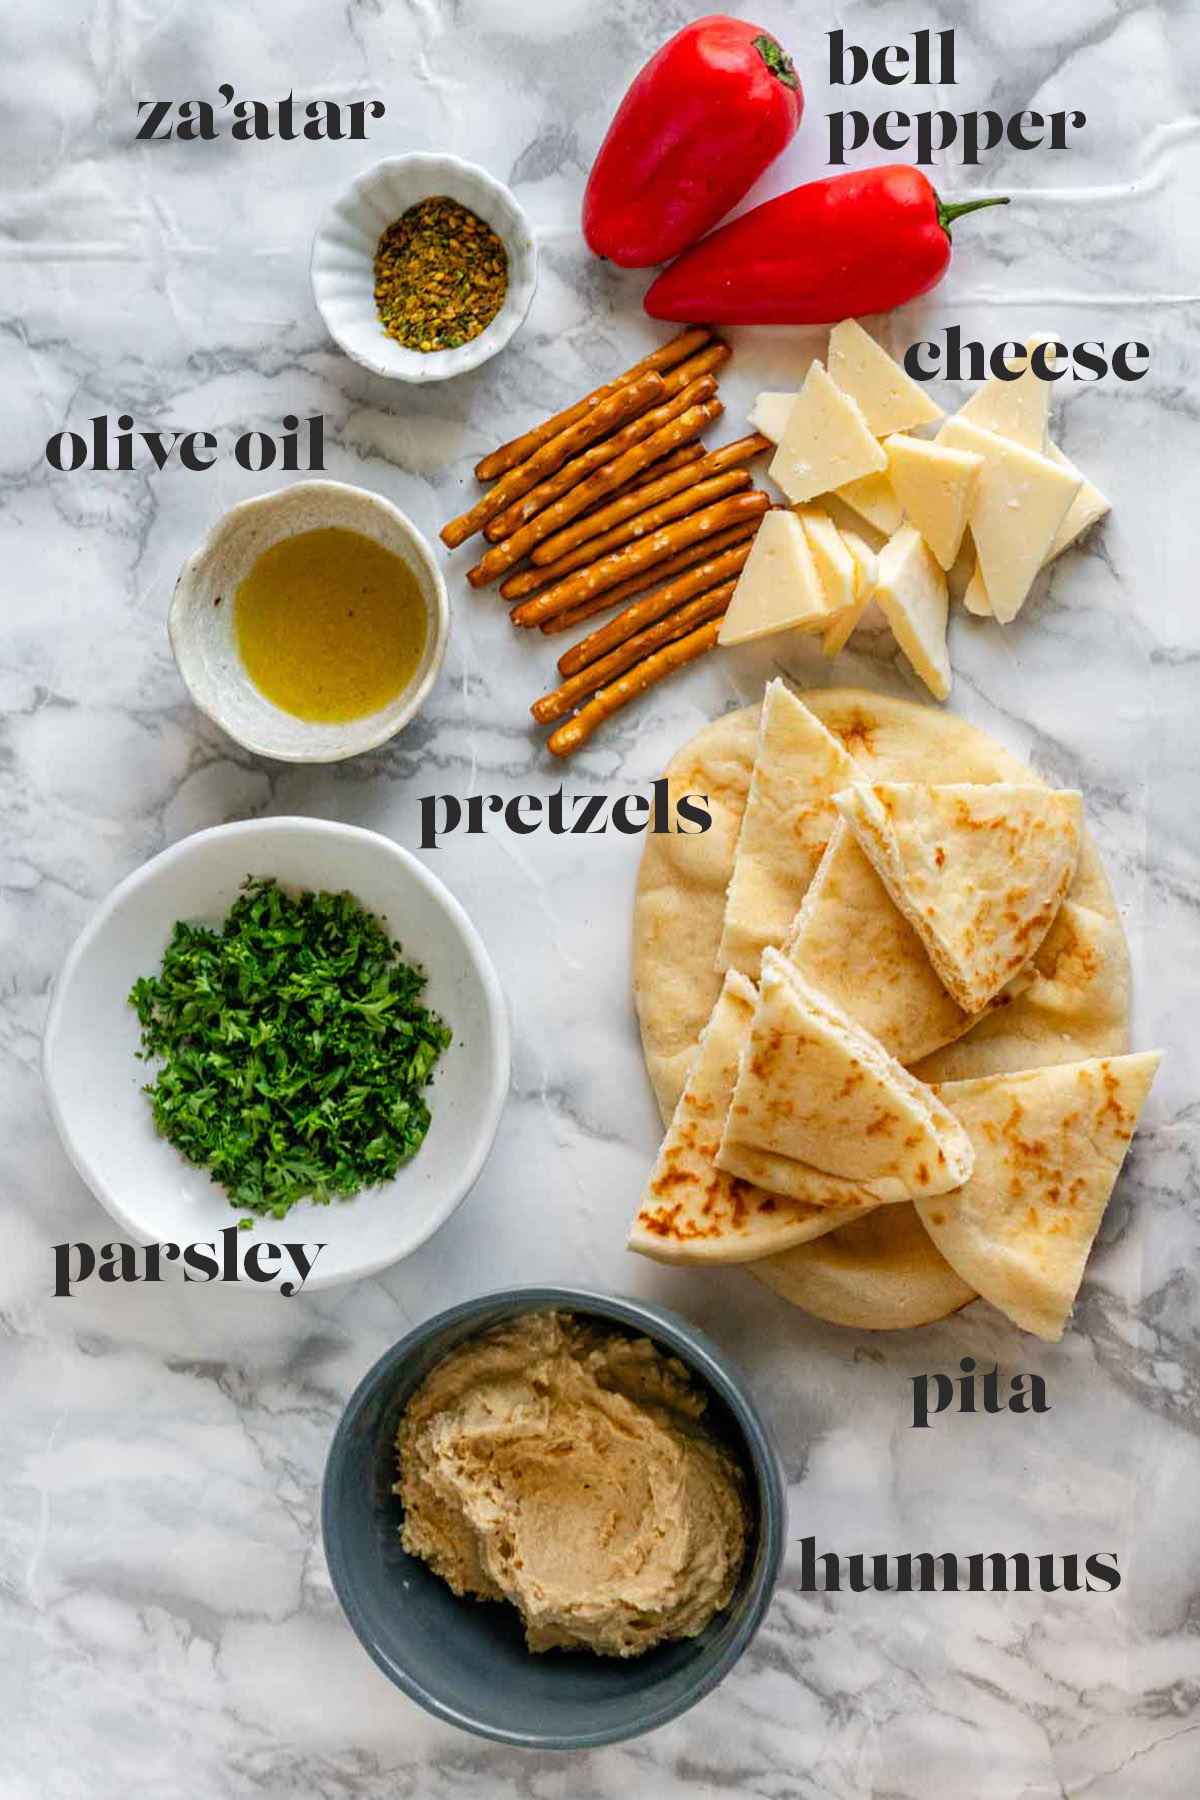 Cut pitas, a bowl or hummus, a bowl of parsley, a bowl or oil, a bowl of za'atar, bell peppers, pretzels, and cheese on a white marble counter.